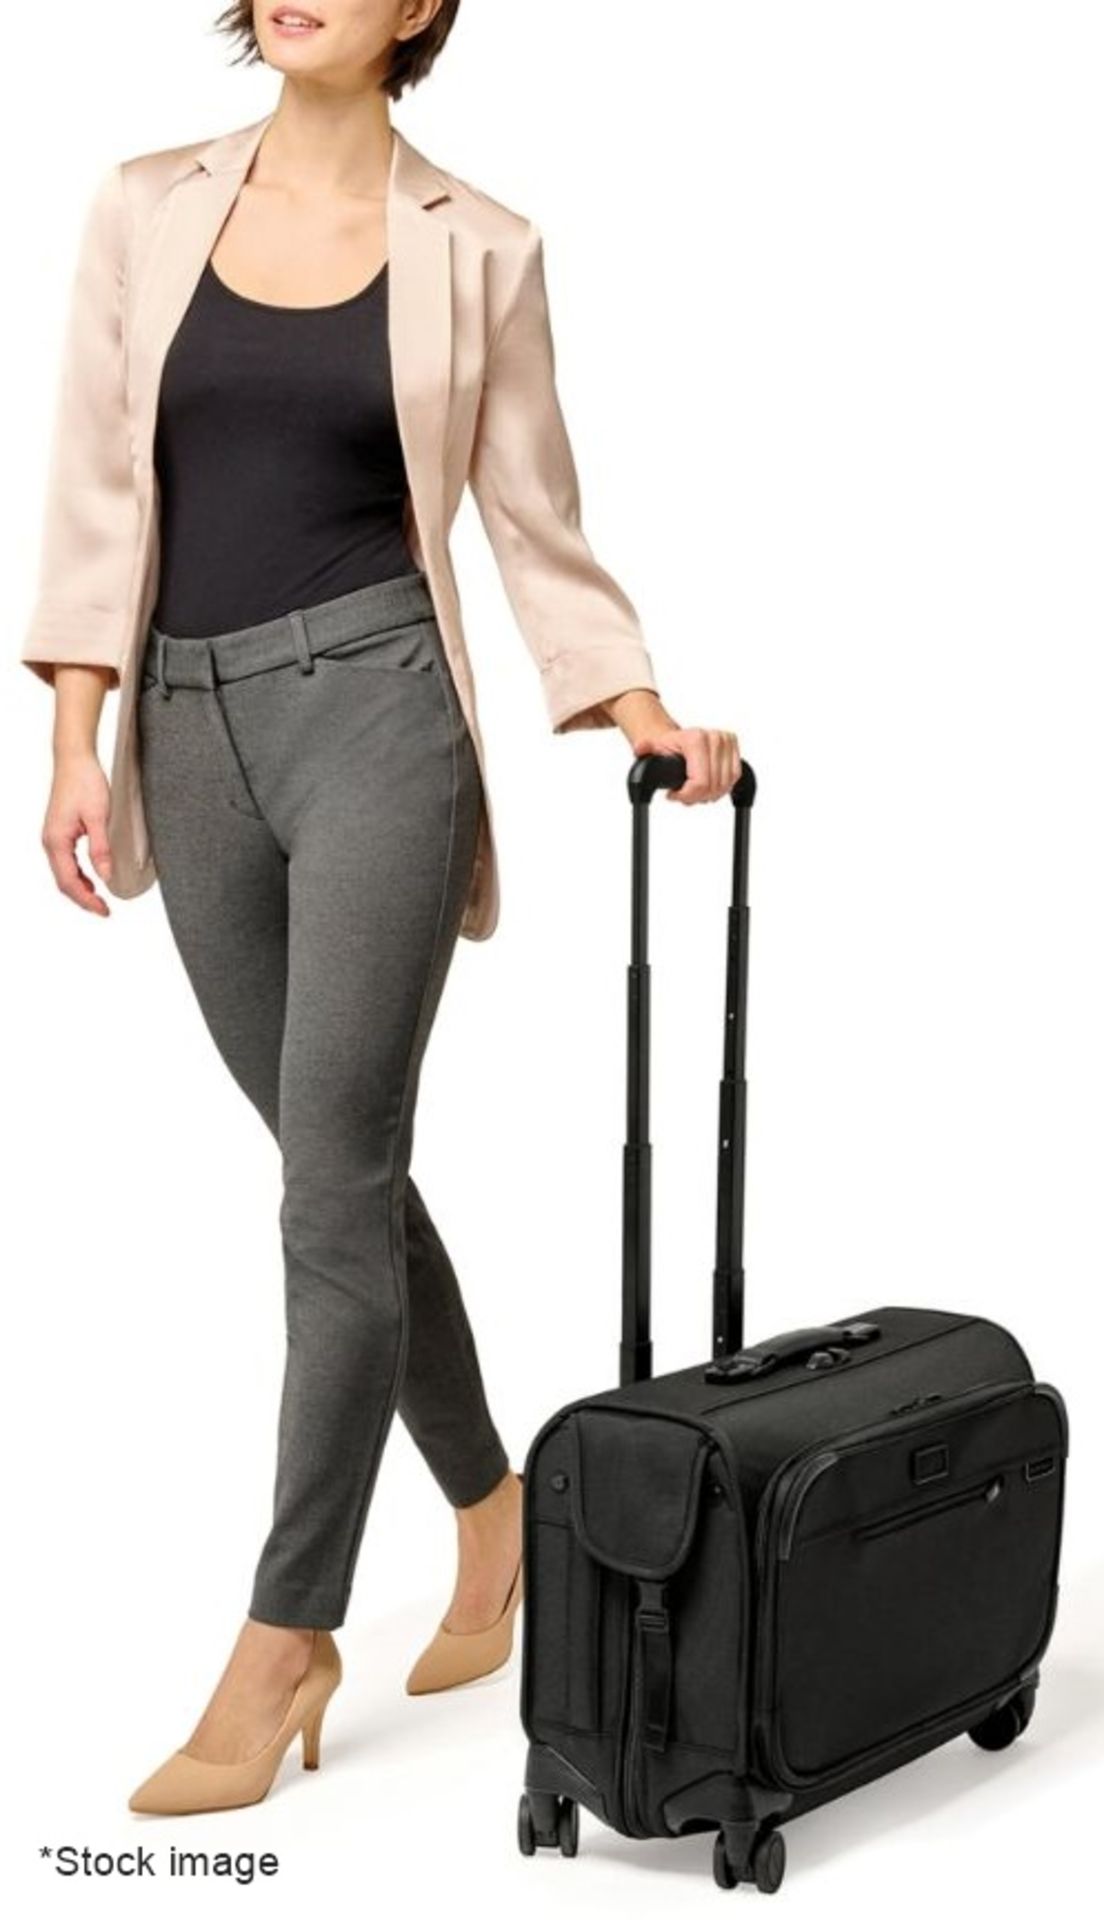 1 x BRIGGS & RILEY Wide Carry-On Baseline Garment Spinner Suitcase (40.5cm) - Original Price £629.00 - Image 4 of 24